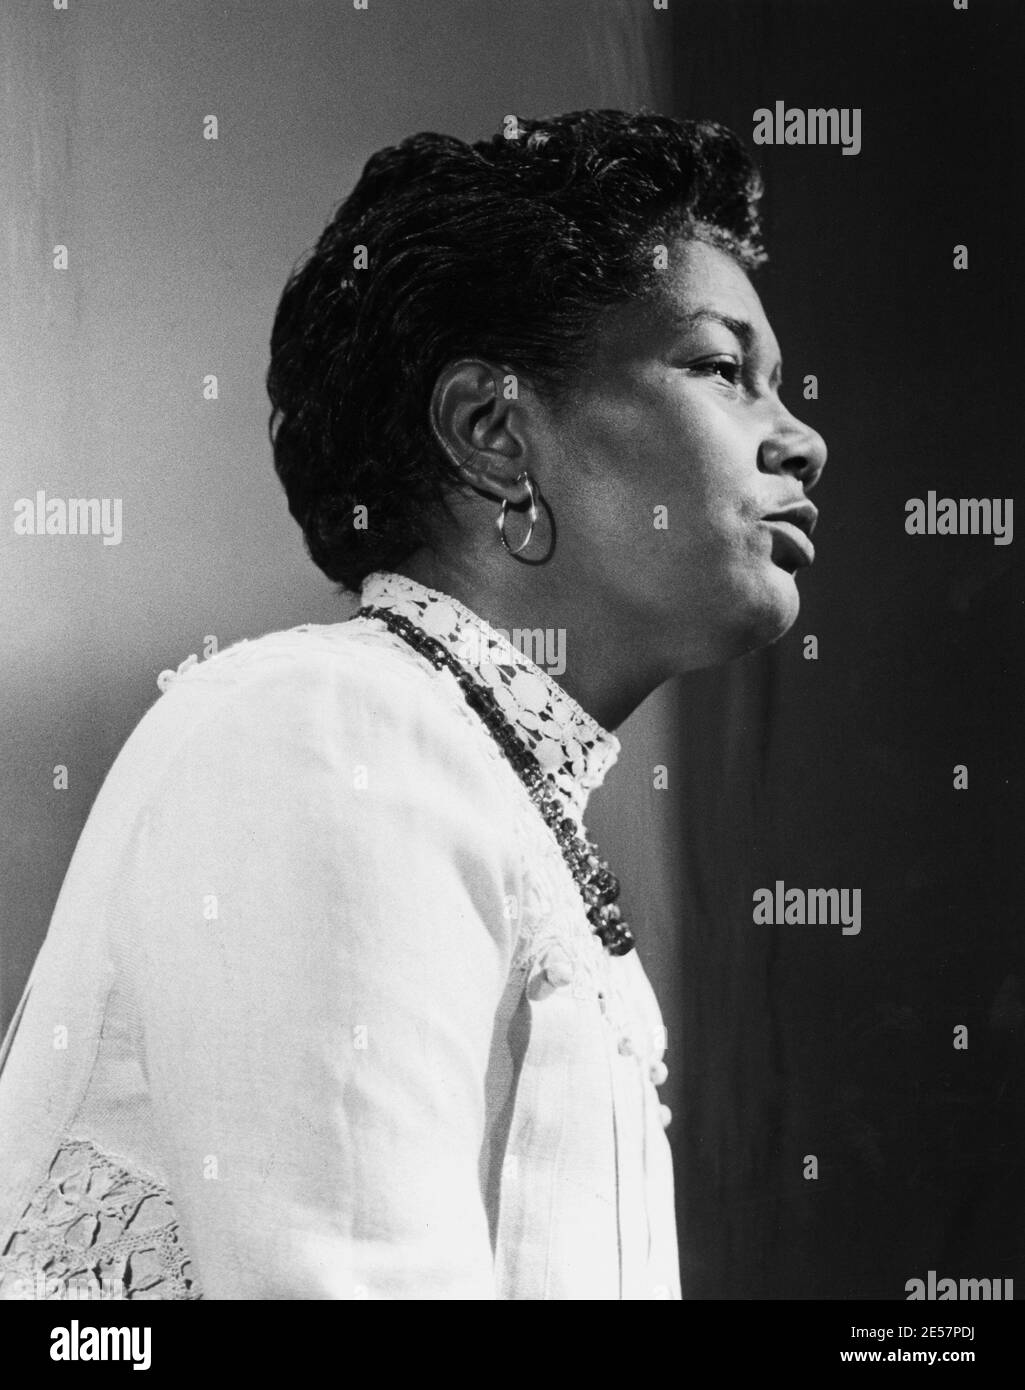 1959 , USA  : The jazz singer and movie actress PEARL BAILEY (  1918  - 1990 ) as Maria in Samuel Goldwyn 's motion picture production of PORGY AND BESS  by Otto Preminger & Rouben Mamoulian , from the GEORGE GERSHWIN & DuBose Heyward classic music drama  MGM productions - CINEMA - FILM - MOVIE - portrait - ritratto -  earring - earrings  - orecchini - orecchino - eardrop - eardrops - jewellery - jewel - jewels - gioiello - gioielli - neckopening - collana - necklace - profilo - profile  ----   Archivio GBB Stock Photo